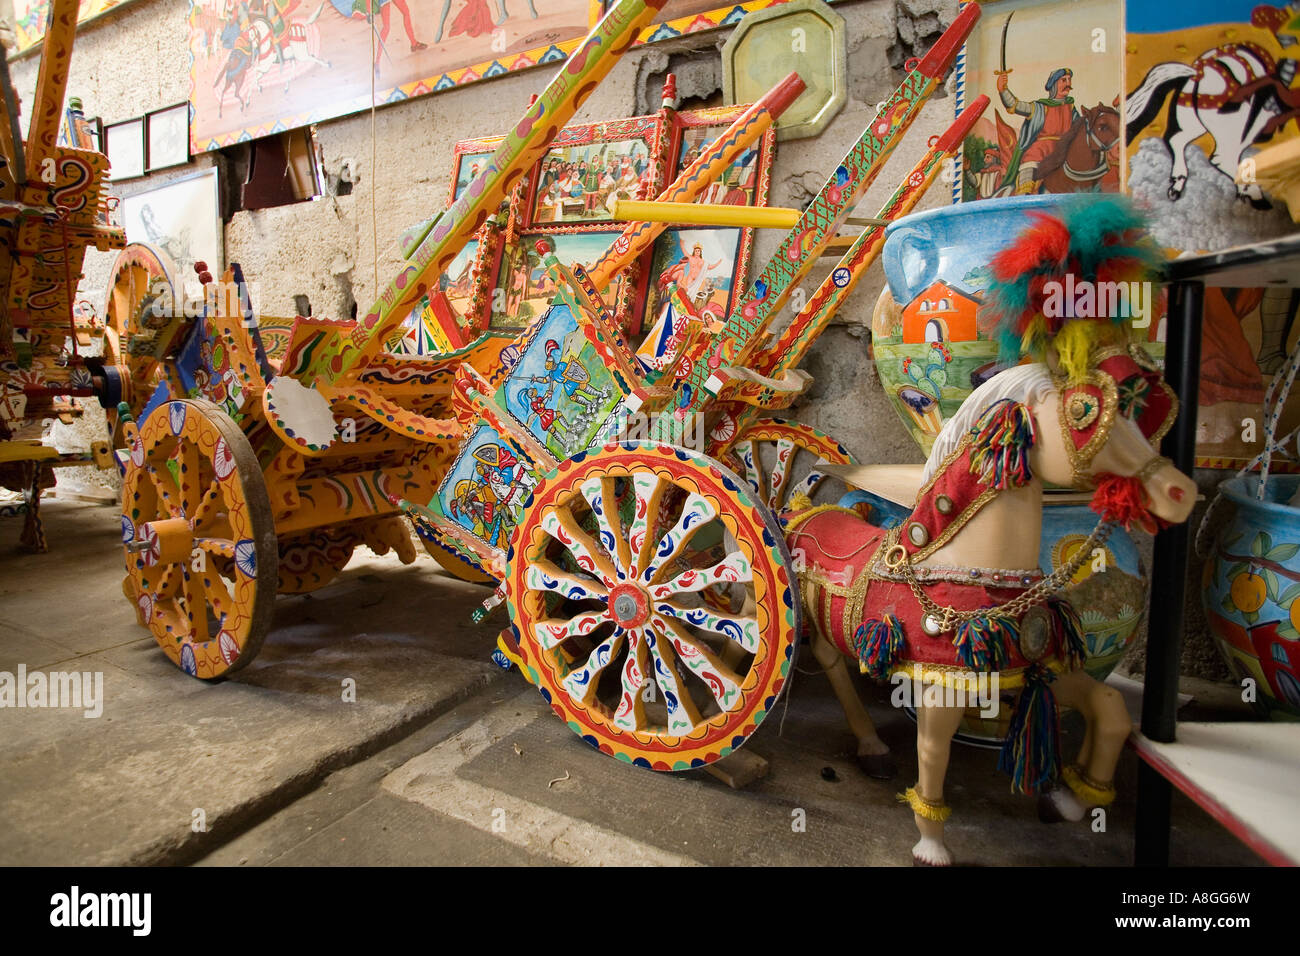 Traditional hand painted Sicilian carts in the workshop and studio of artist Franco Bertolino Palermo Sicily Italy Stock Photo